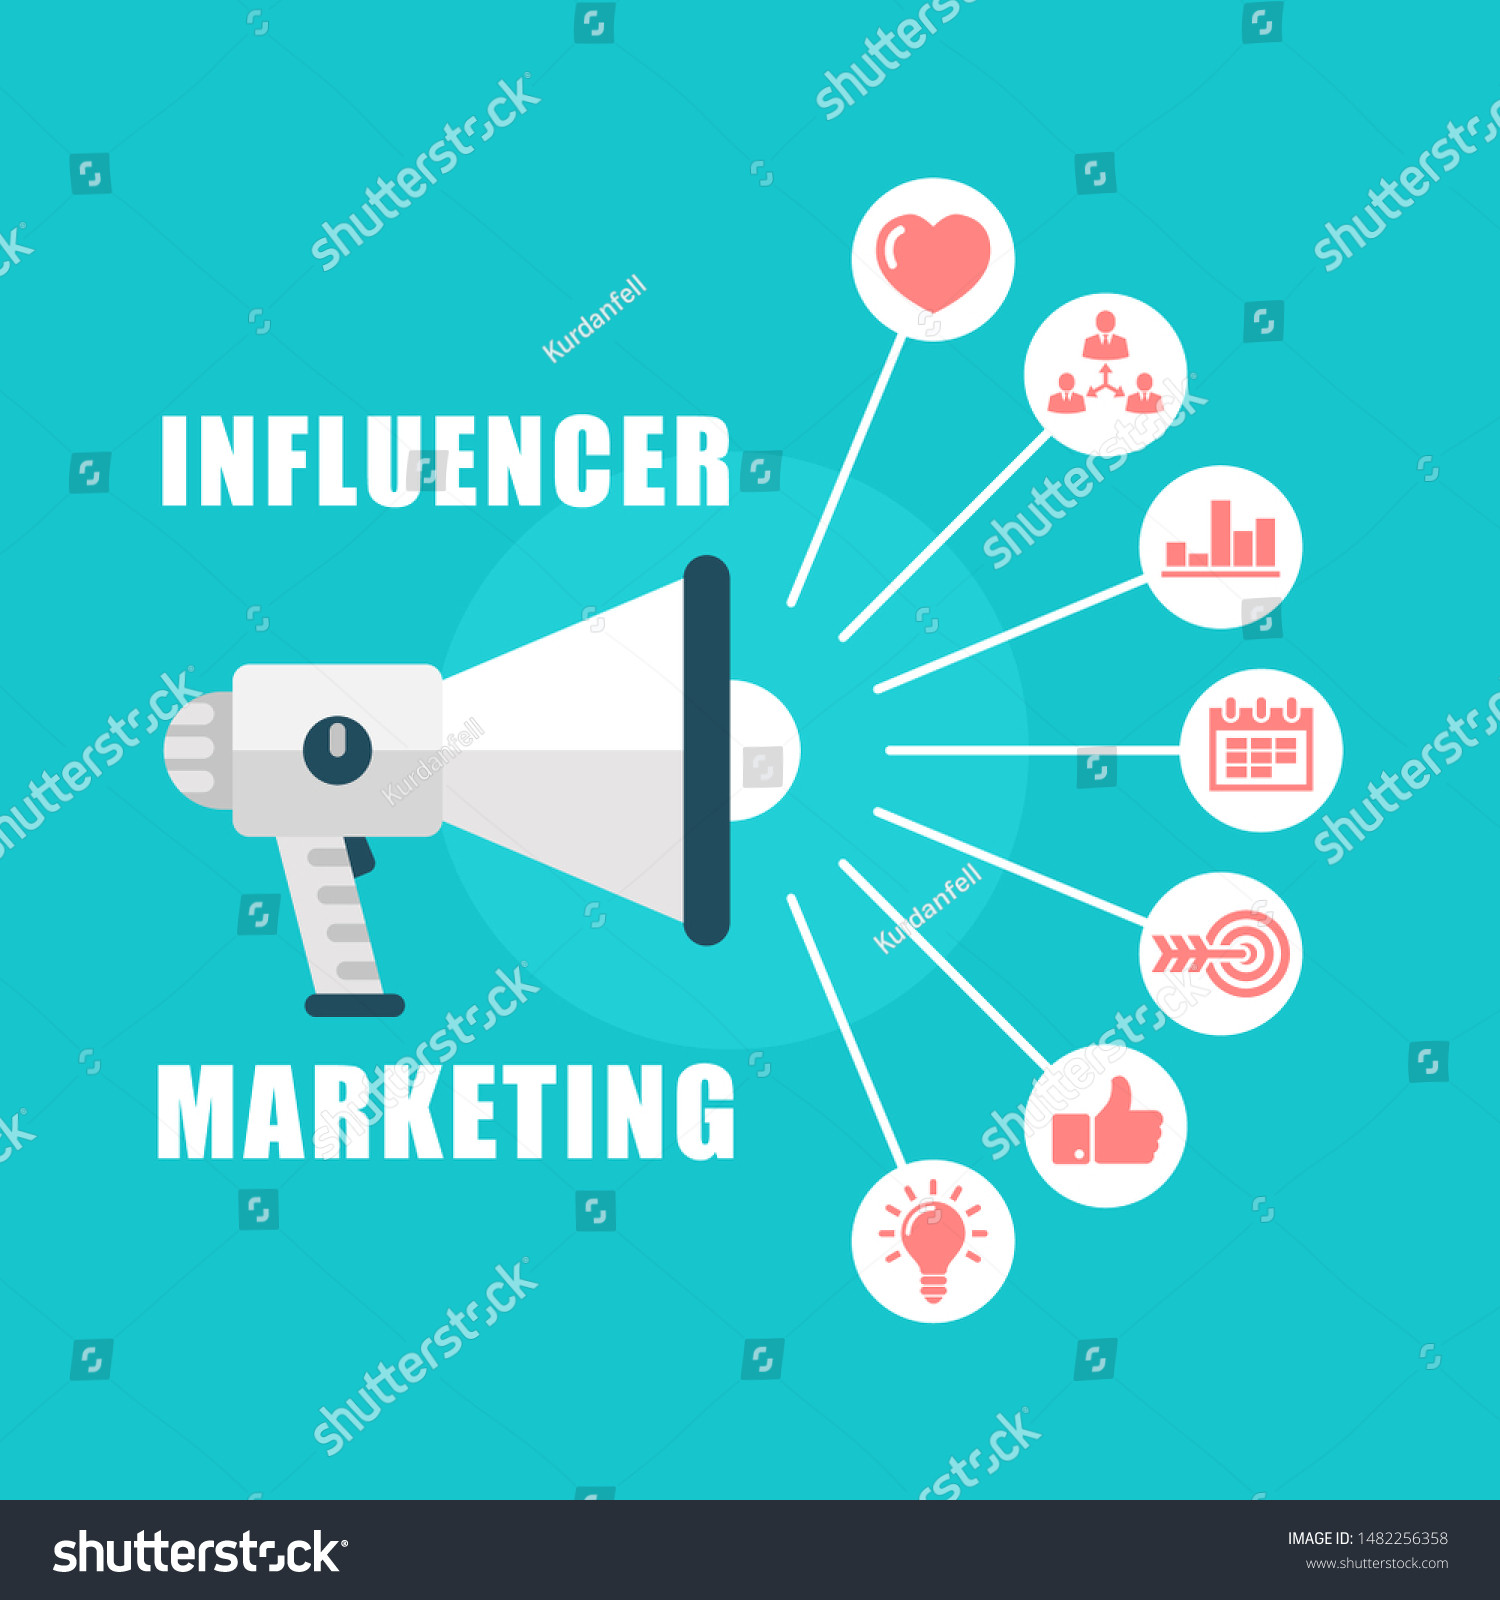 Illustration of a megaphone with various icons representing influencer marketing: a heart, group of people, bar chart, calendar, target, thumbs up, lightbulb, and globe. Text reads "INFLUENCER MARKETING" on a teal background.